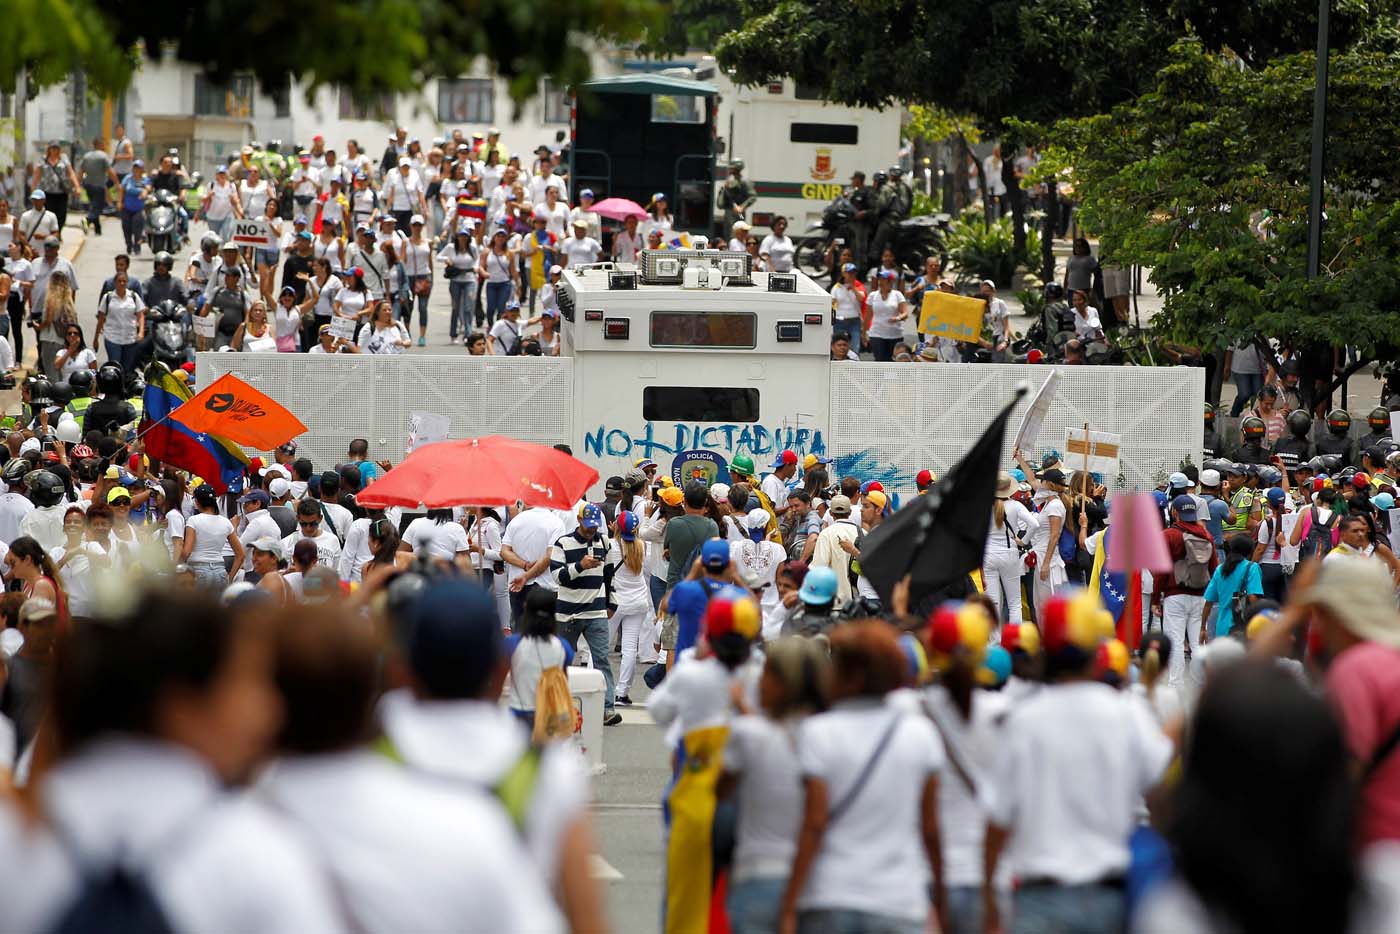 Demonstrators gather in front of the police during a women's march to protest against President Nicolas Maduro's government in Caracas, Venezuela May 6, 2017. REUTERS/Christian Veron